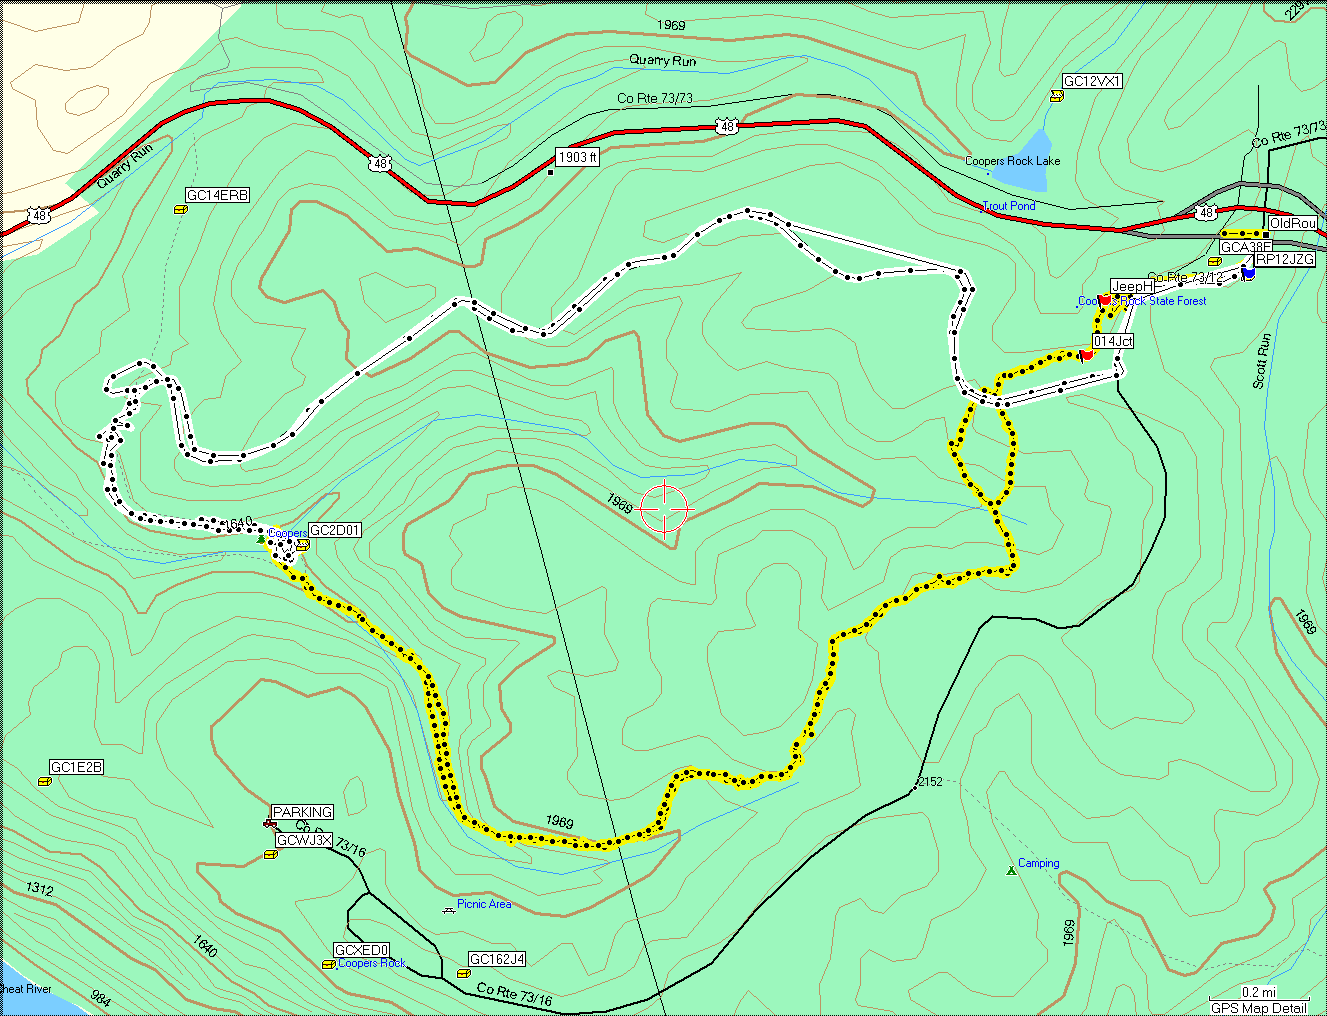 Track of Hike (Yellow) and our previous visit (White)